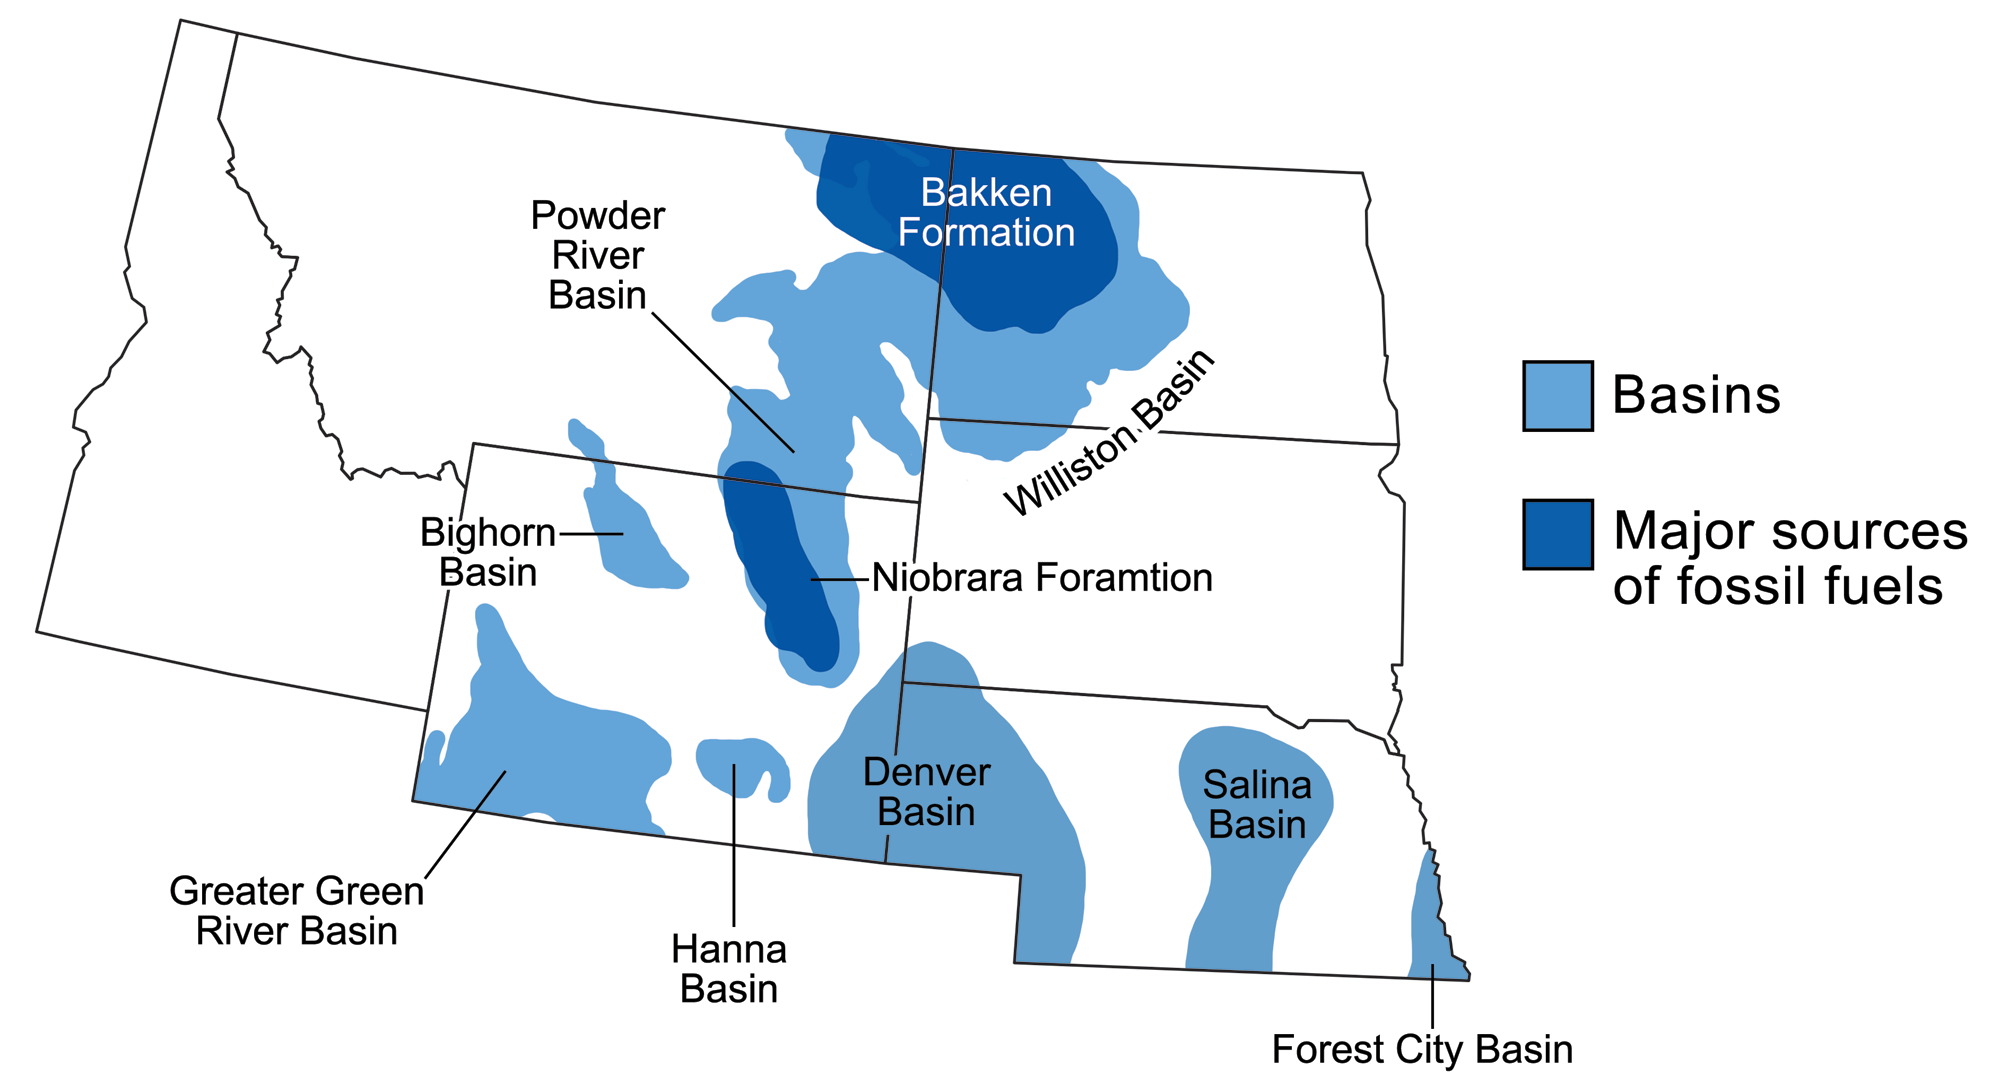 Map of the northwest-central region with state boundaries outlined in black. Major sedimentary basins are shaded medium blue, and major sources of fossil fuels are shaded dark blue. The Williston Basin mainly in western North Dakota and eastern Montana has the Bakken Formation, and the Powder River Basin in eastern Montana and Wyoming contains the Niobrara Formation. Other basins include the Bighorn Basin (Montana, Wyoming), the Greater Green River Basin (southwestern Wyoming), the Hanna Basin (south-central Wyoming), the Denver Basin (Wyoming-Nebraska-South Dakota border region), Salina Basin (central Nebraska), and the Forest City Basin (southeastern Nebraska).